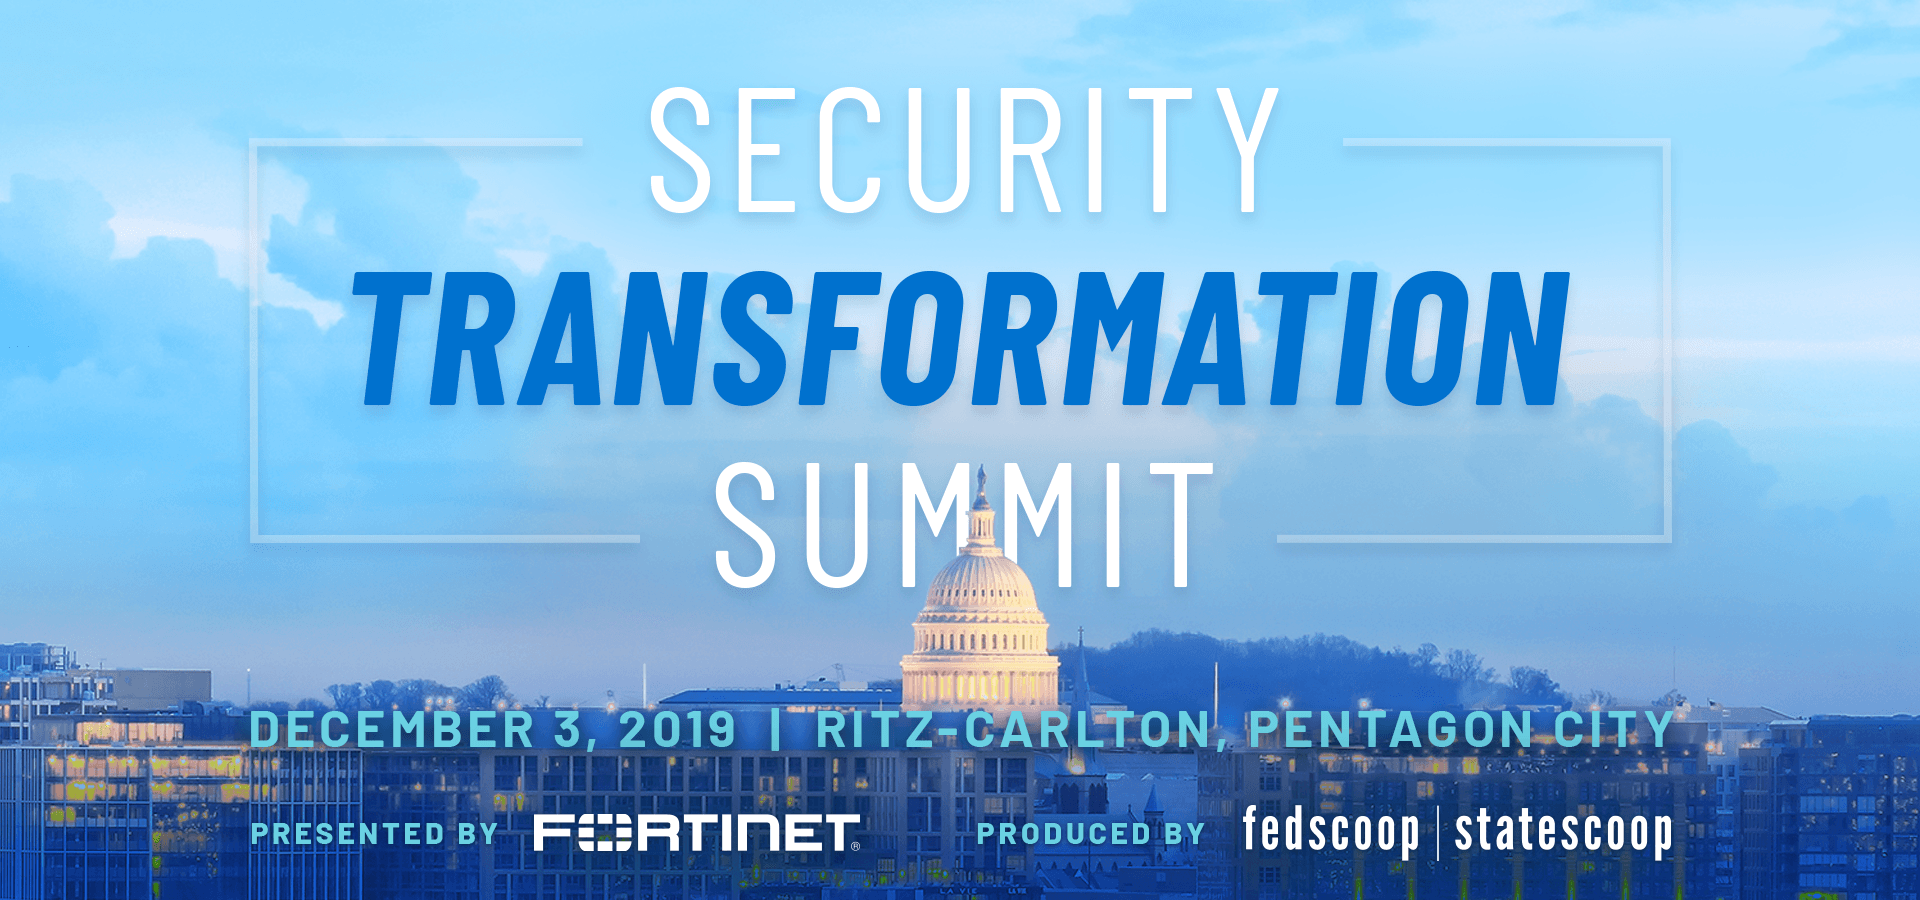 2019 Security Transformation Summit 12.03.19 produced by FedScoop | StateScoop